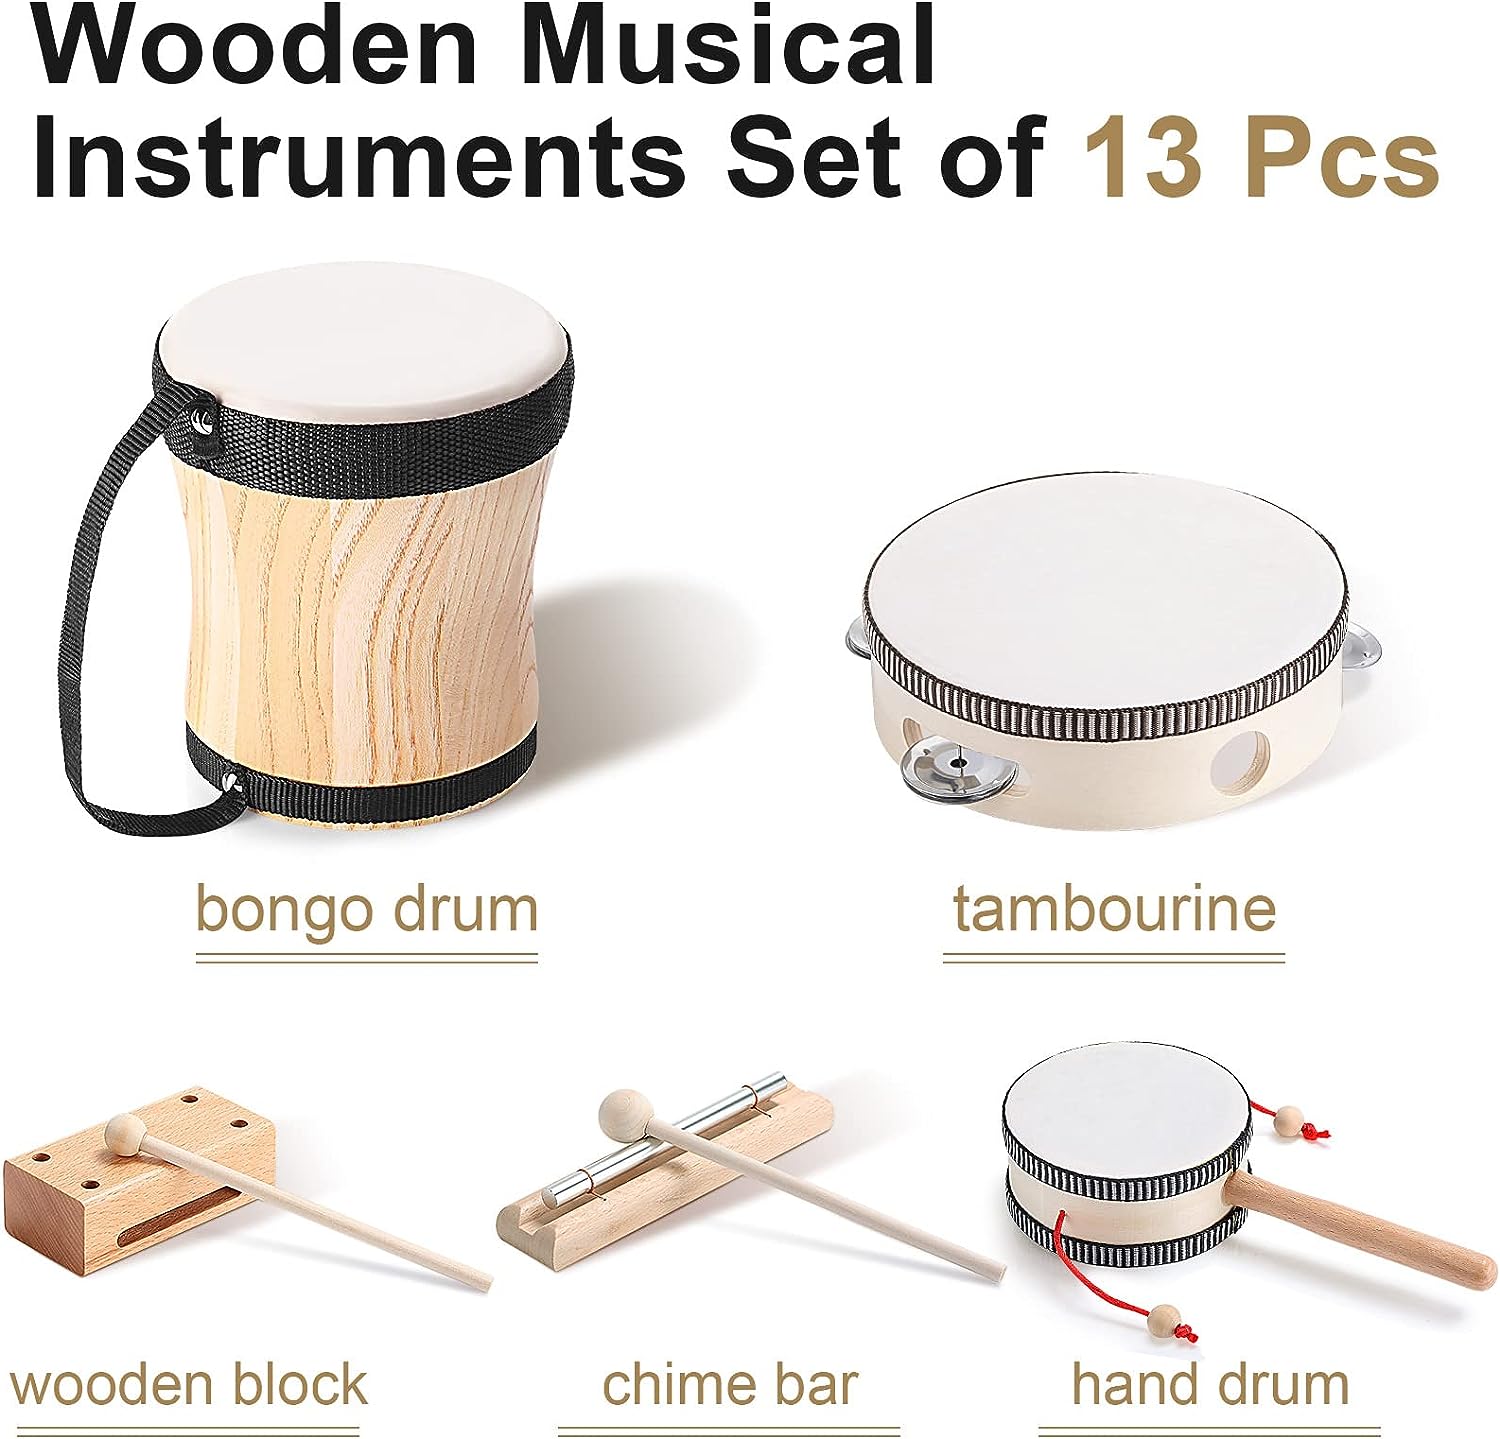 Musical Instruments Set Natural Wooden Musical Toys Preschool Educational Music Toys Set Bongo Drum Musical Instruments for Kids Preschool Educational Learning Toys (Drum, 13 Pcs)